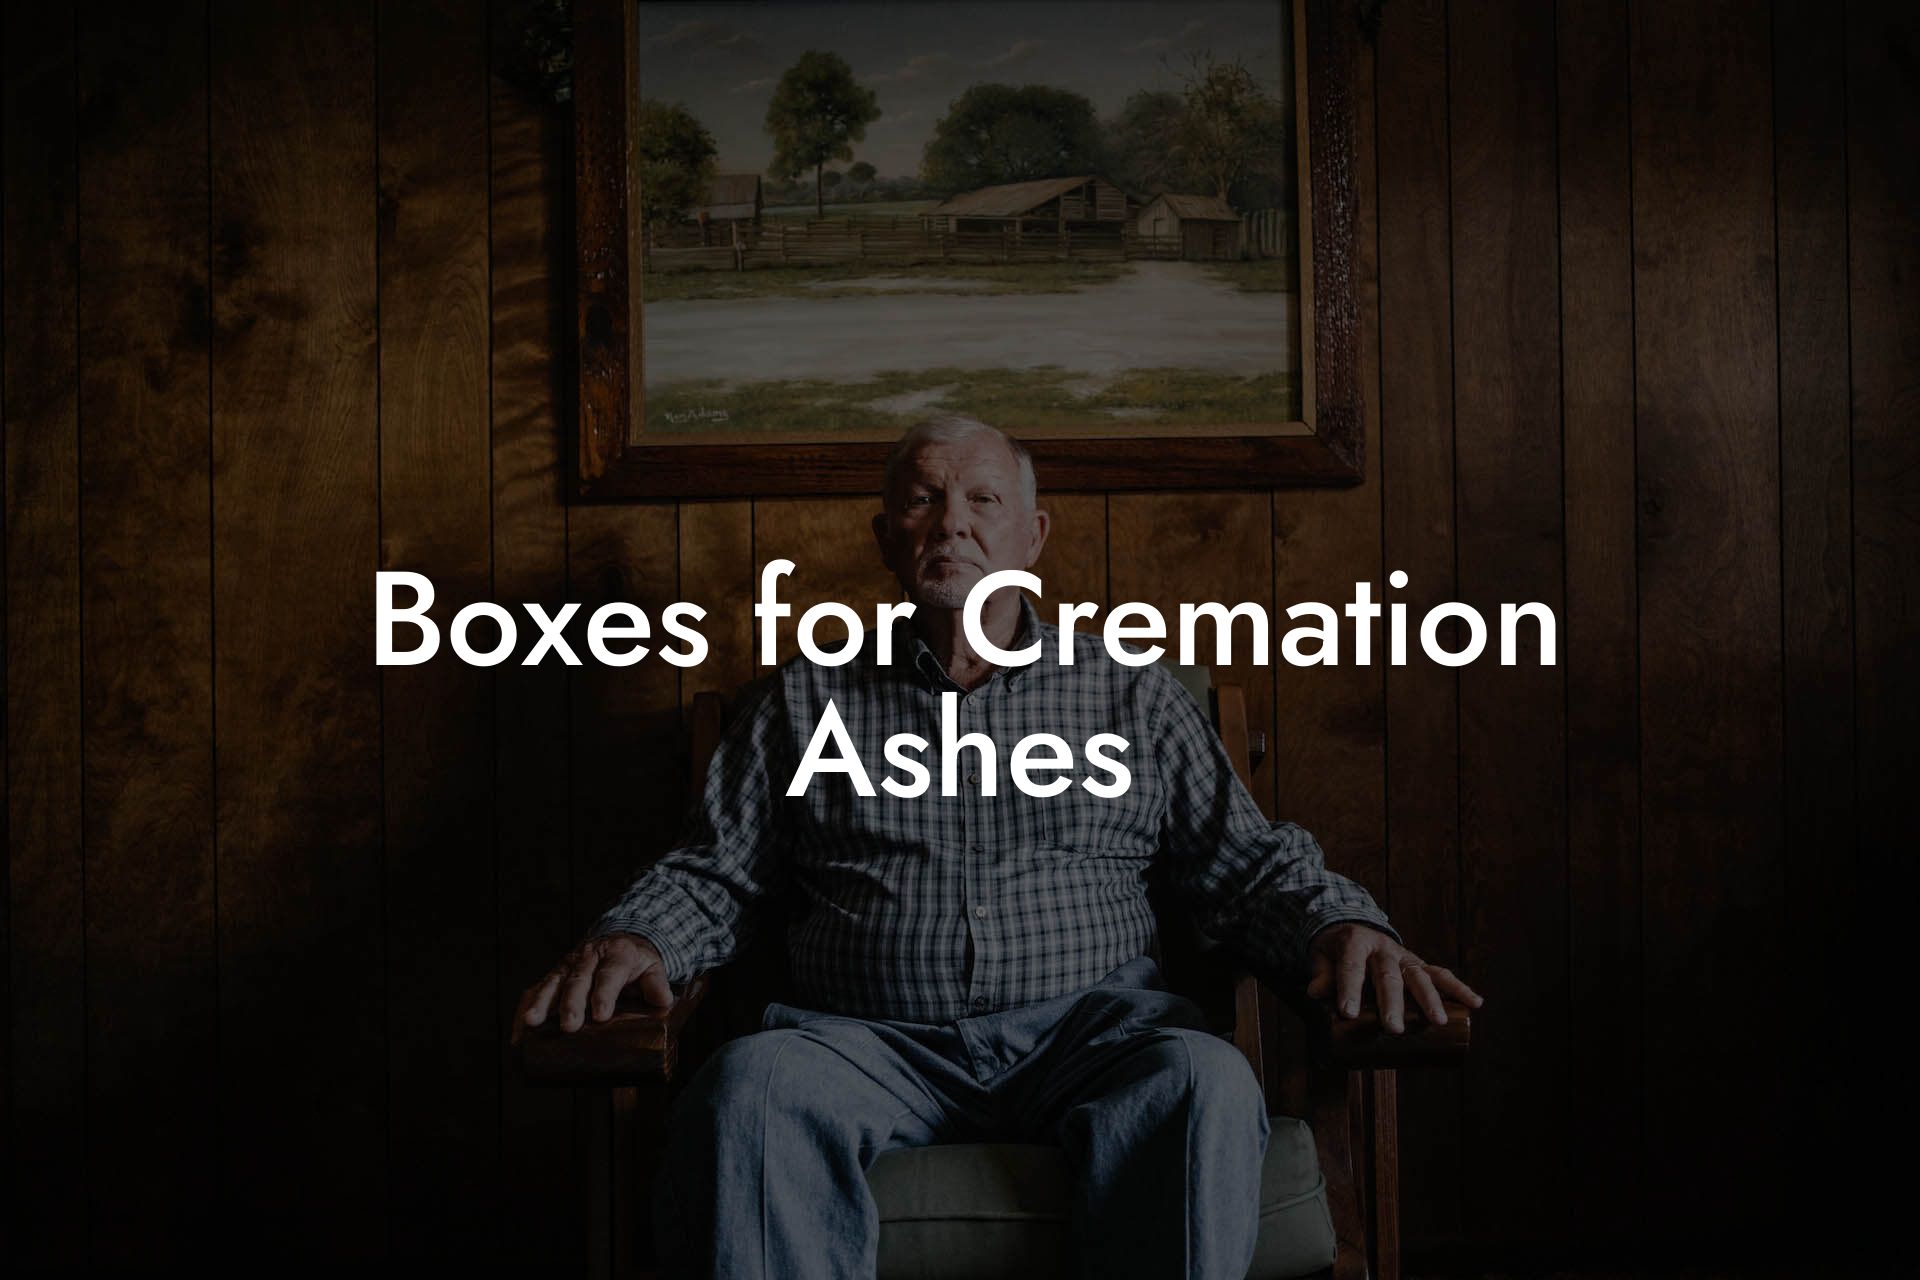 Boxes for Cremation Ashes